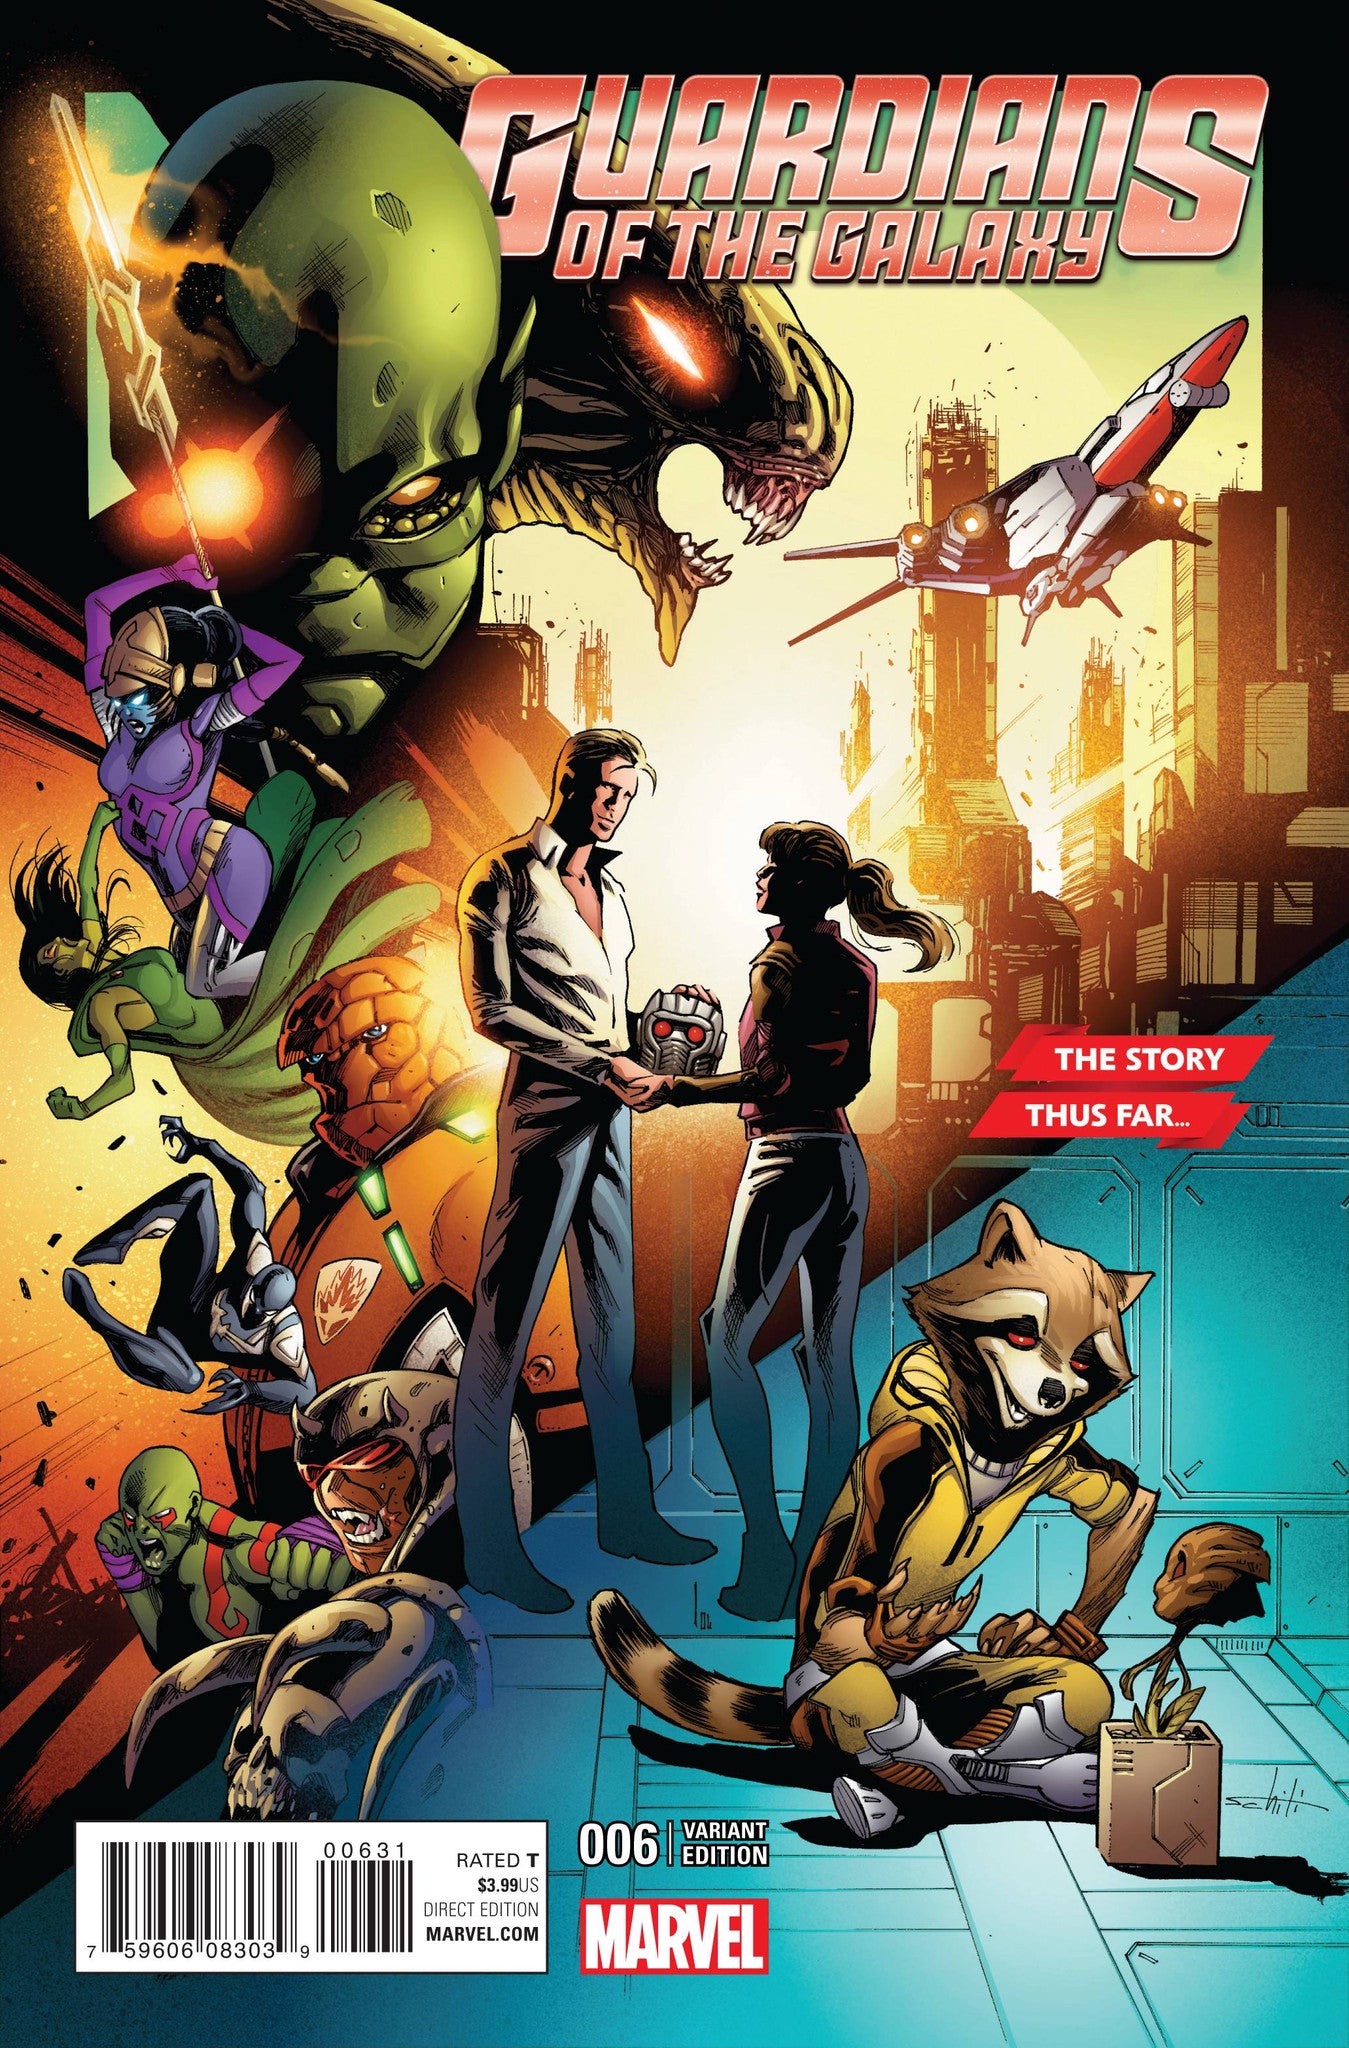 GUARDIANS OF GALAXY #6 SCHITISTORY THUS FAR VARIANT COVER